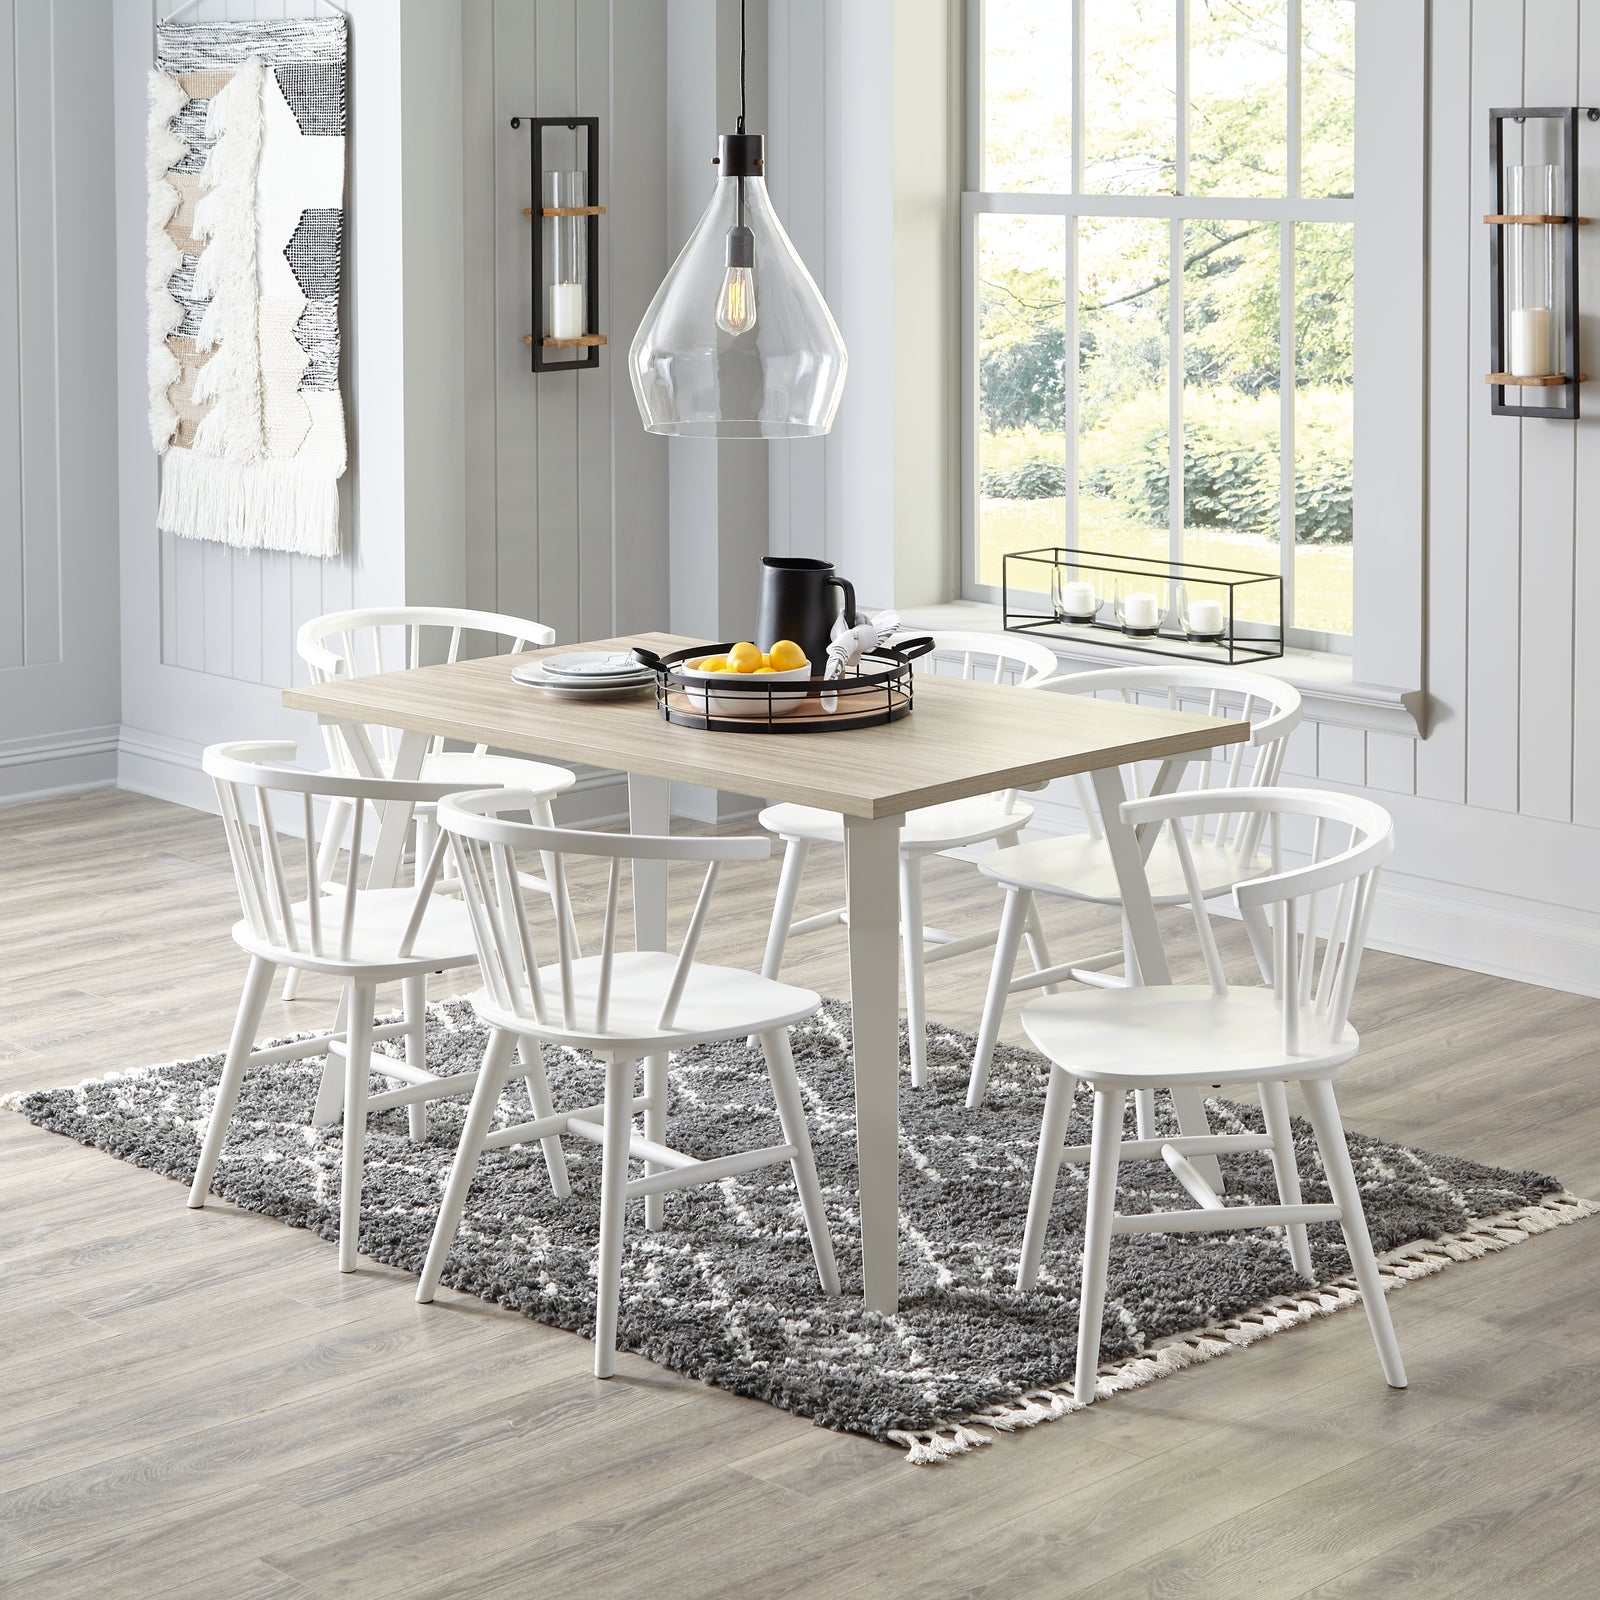 Grannen White/natural Circle Dining Room Set